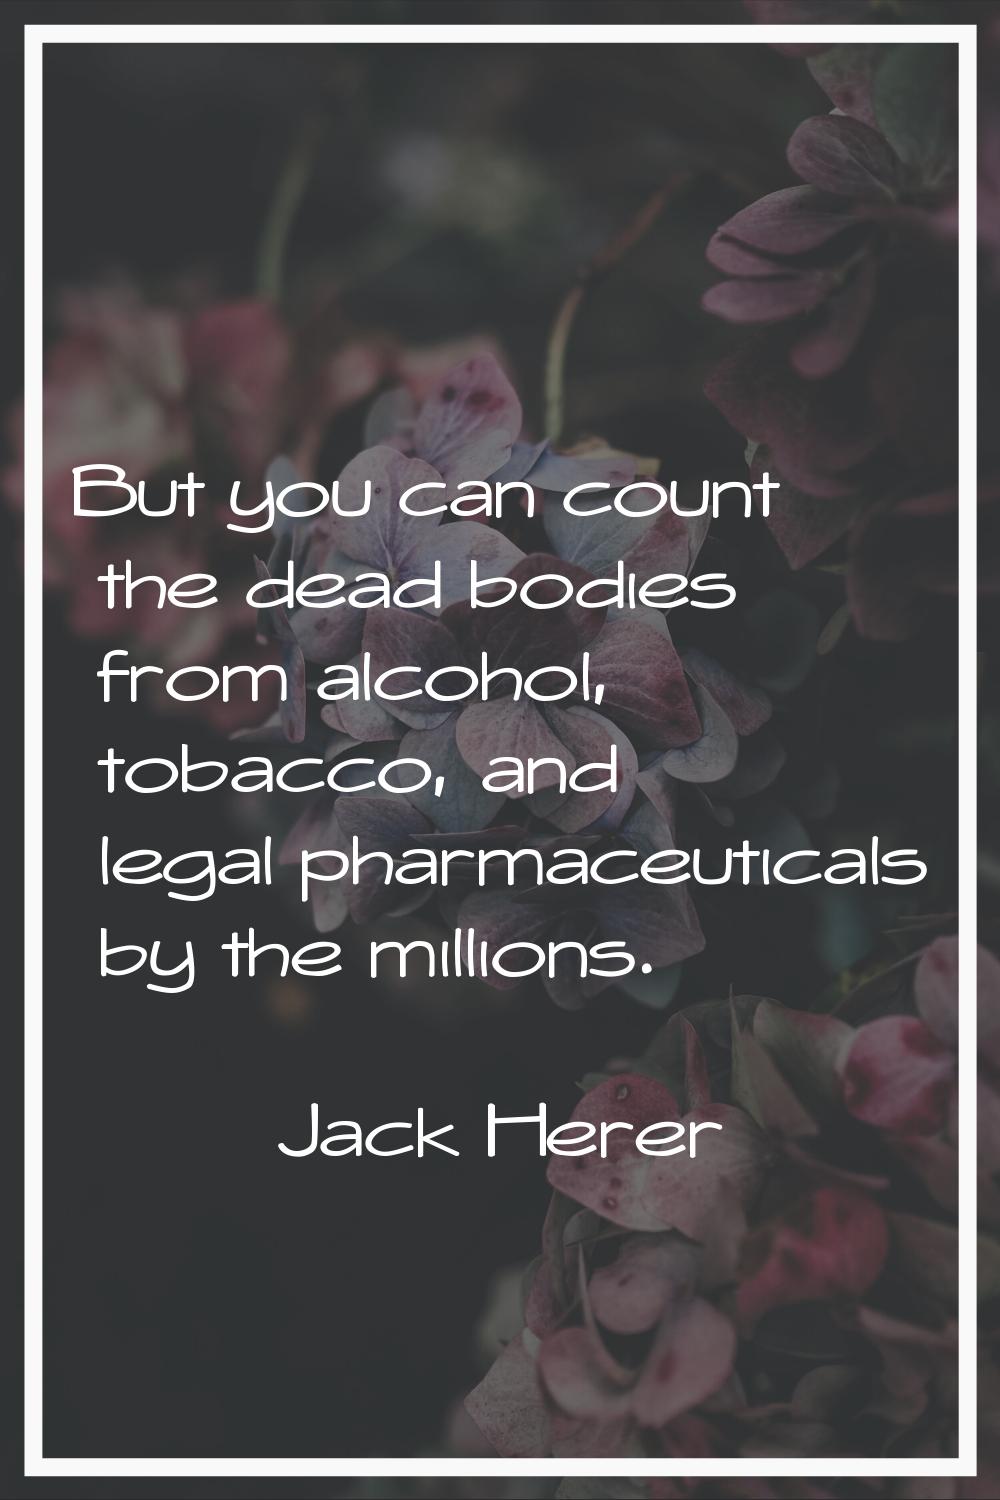 But you can count the dead bodies from alcohol, tobacco, and legal pharmaceuticals by the millions.